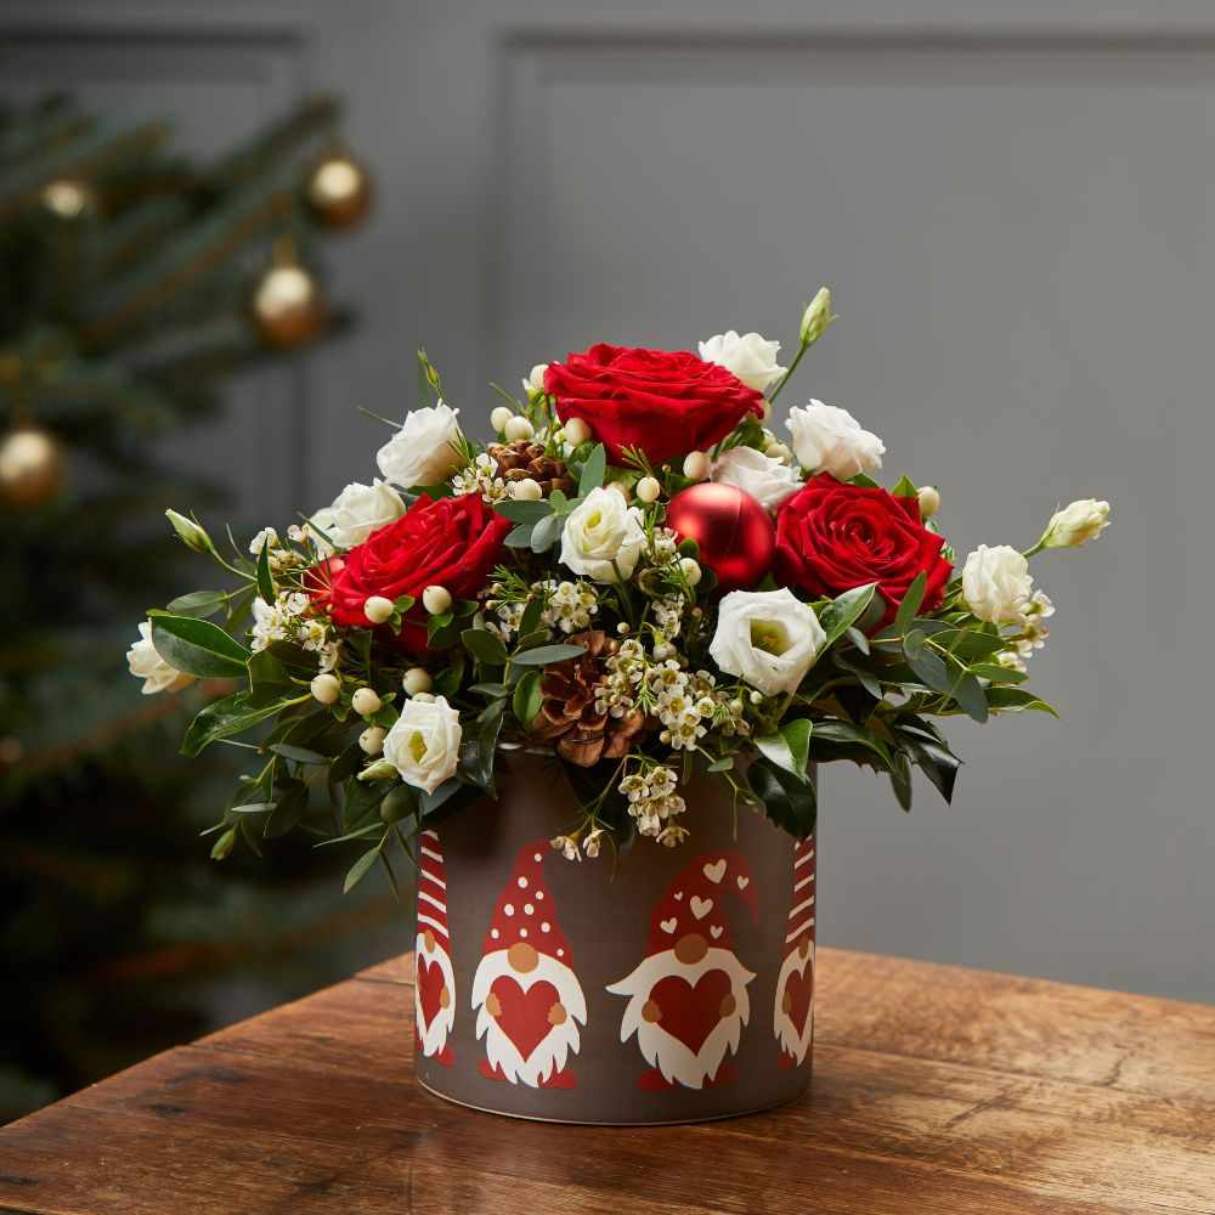 How To Make Christmas Floral Arrangements